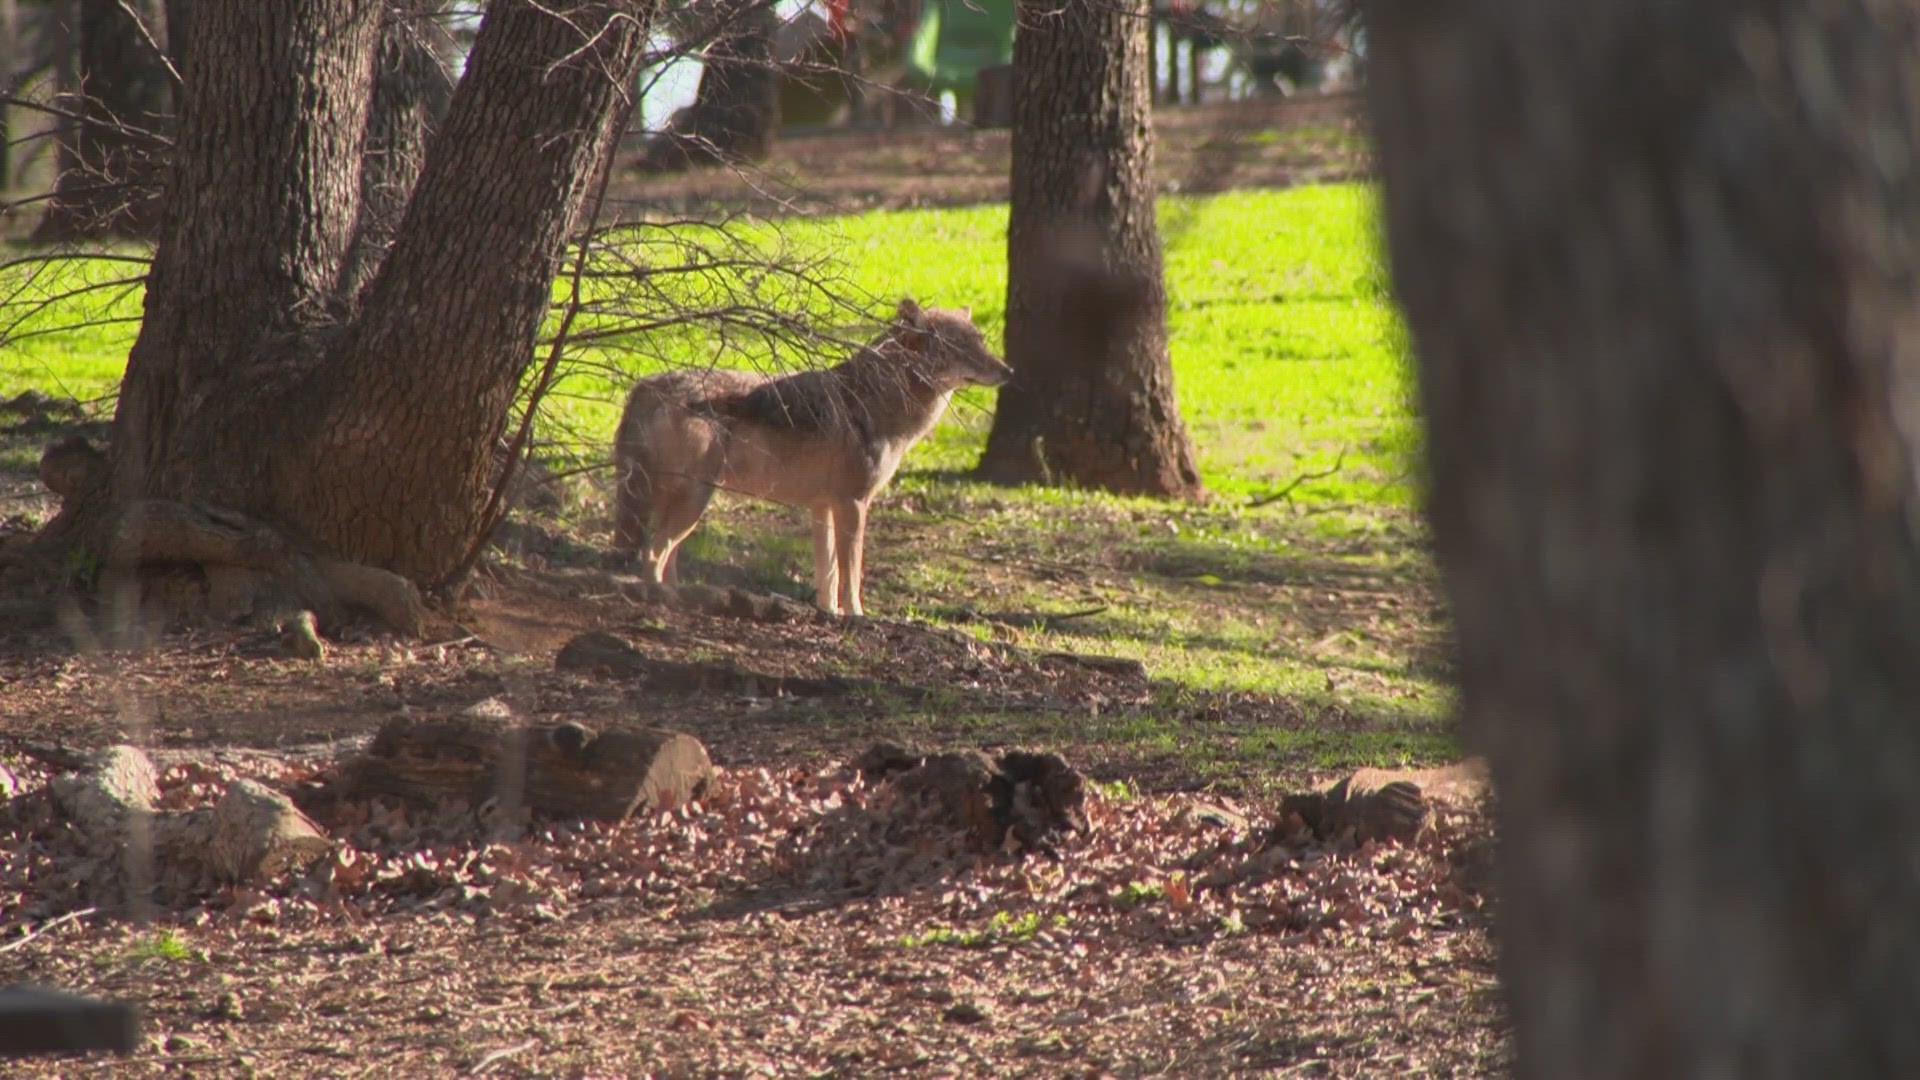 A week after a coyote bit three children in separate incidents, Parkway Central Park in Arlington reopened to the public.